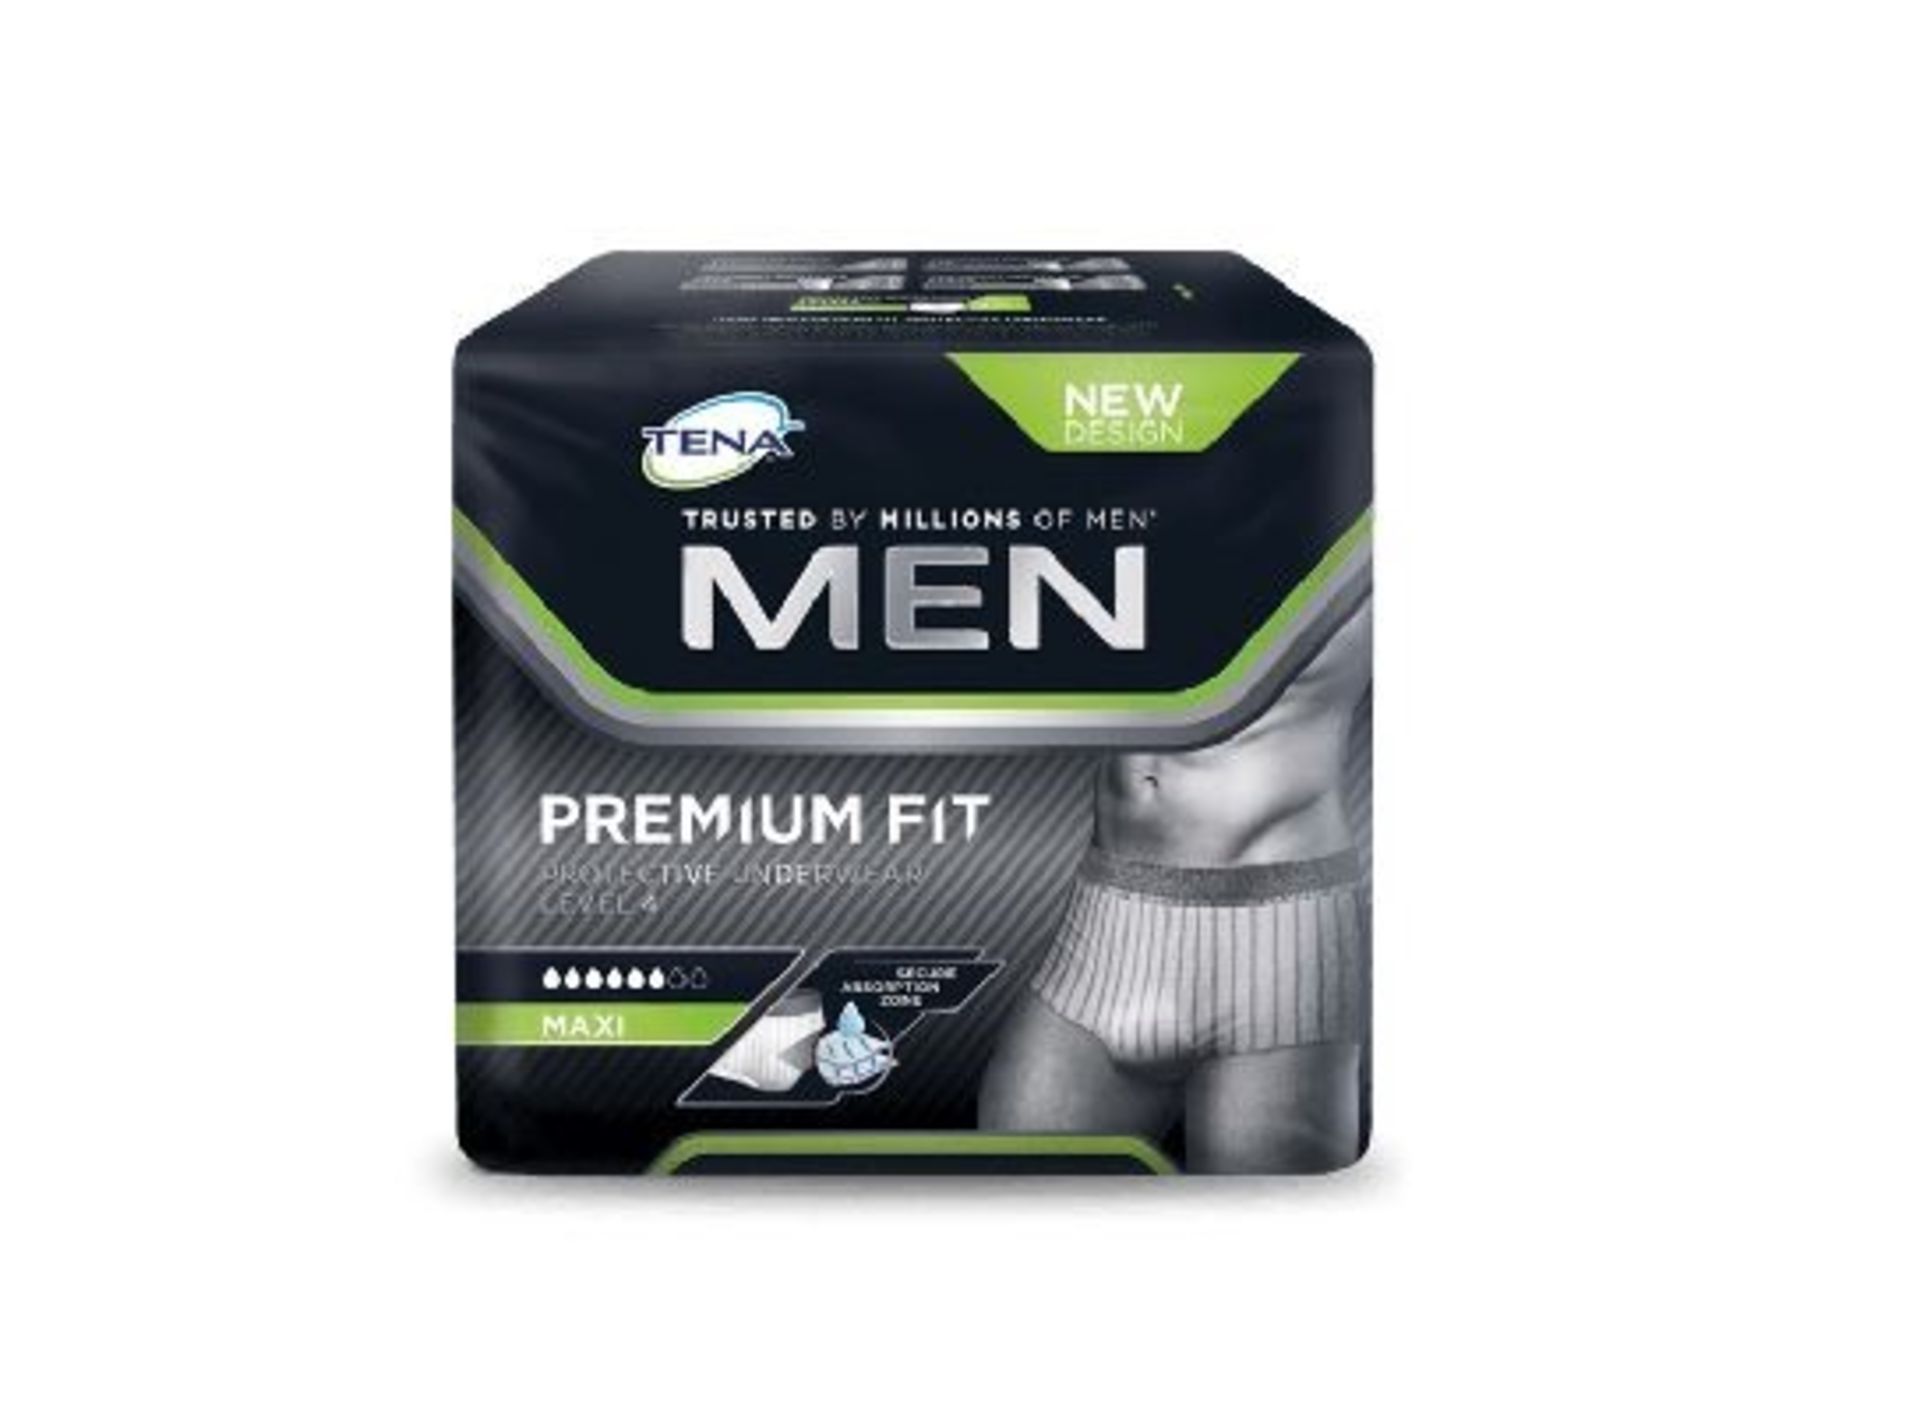 ME : 1 LOT TO CONTAIN 48 TENA MEN PREMIUM FIT LEVEL 4 PADS - SIZE LARGE / QTY 2 BOXES WITH 3 PACKS